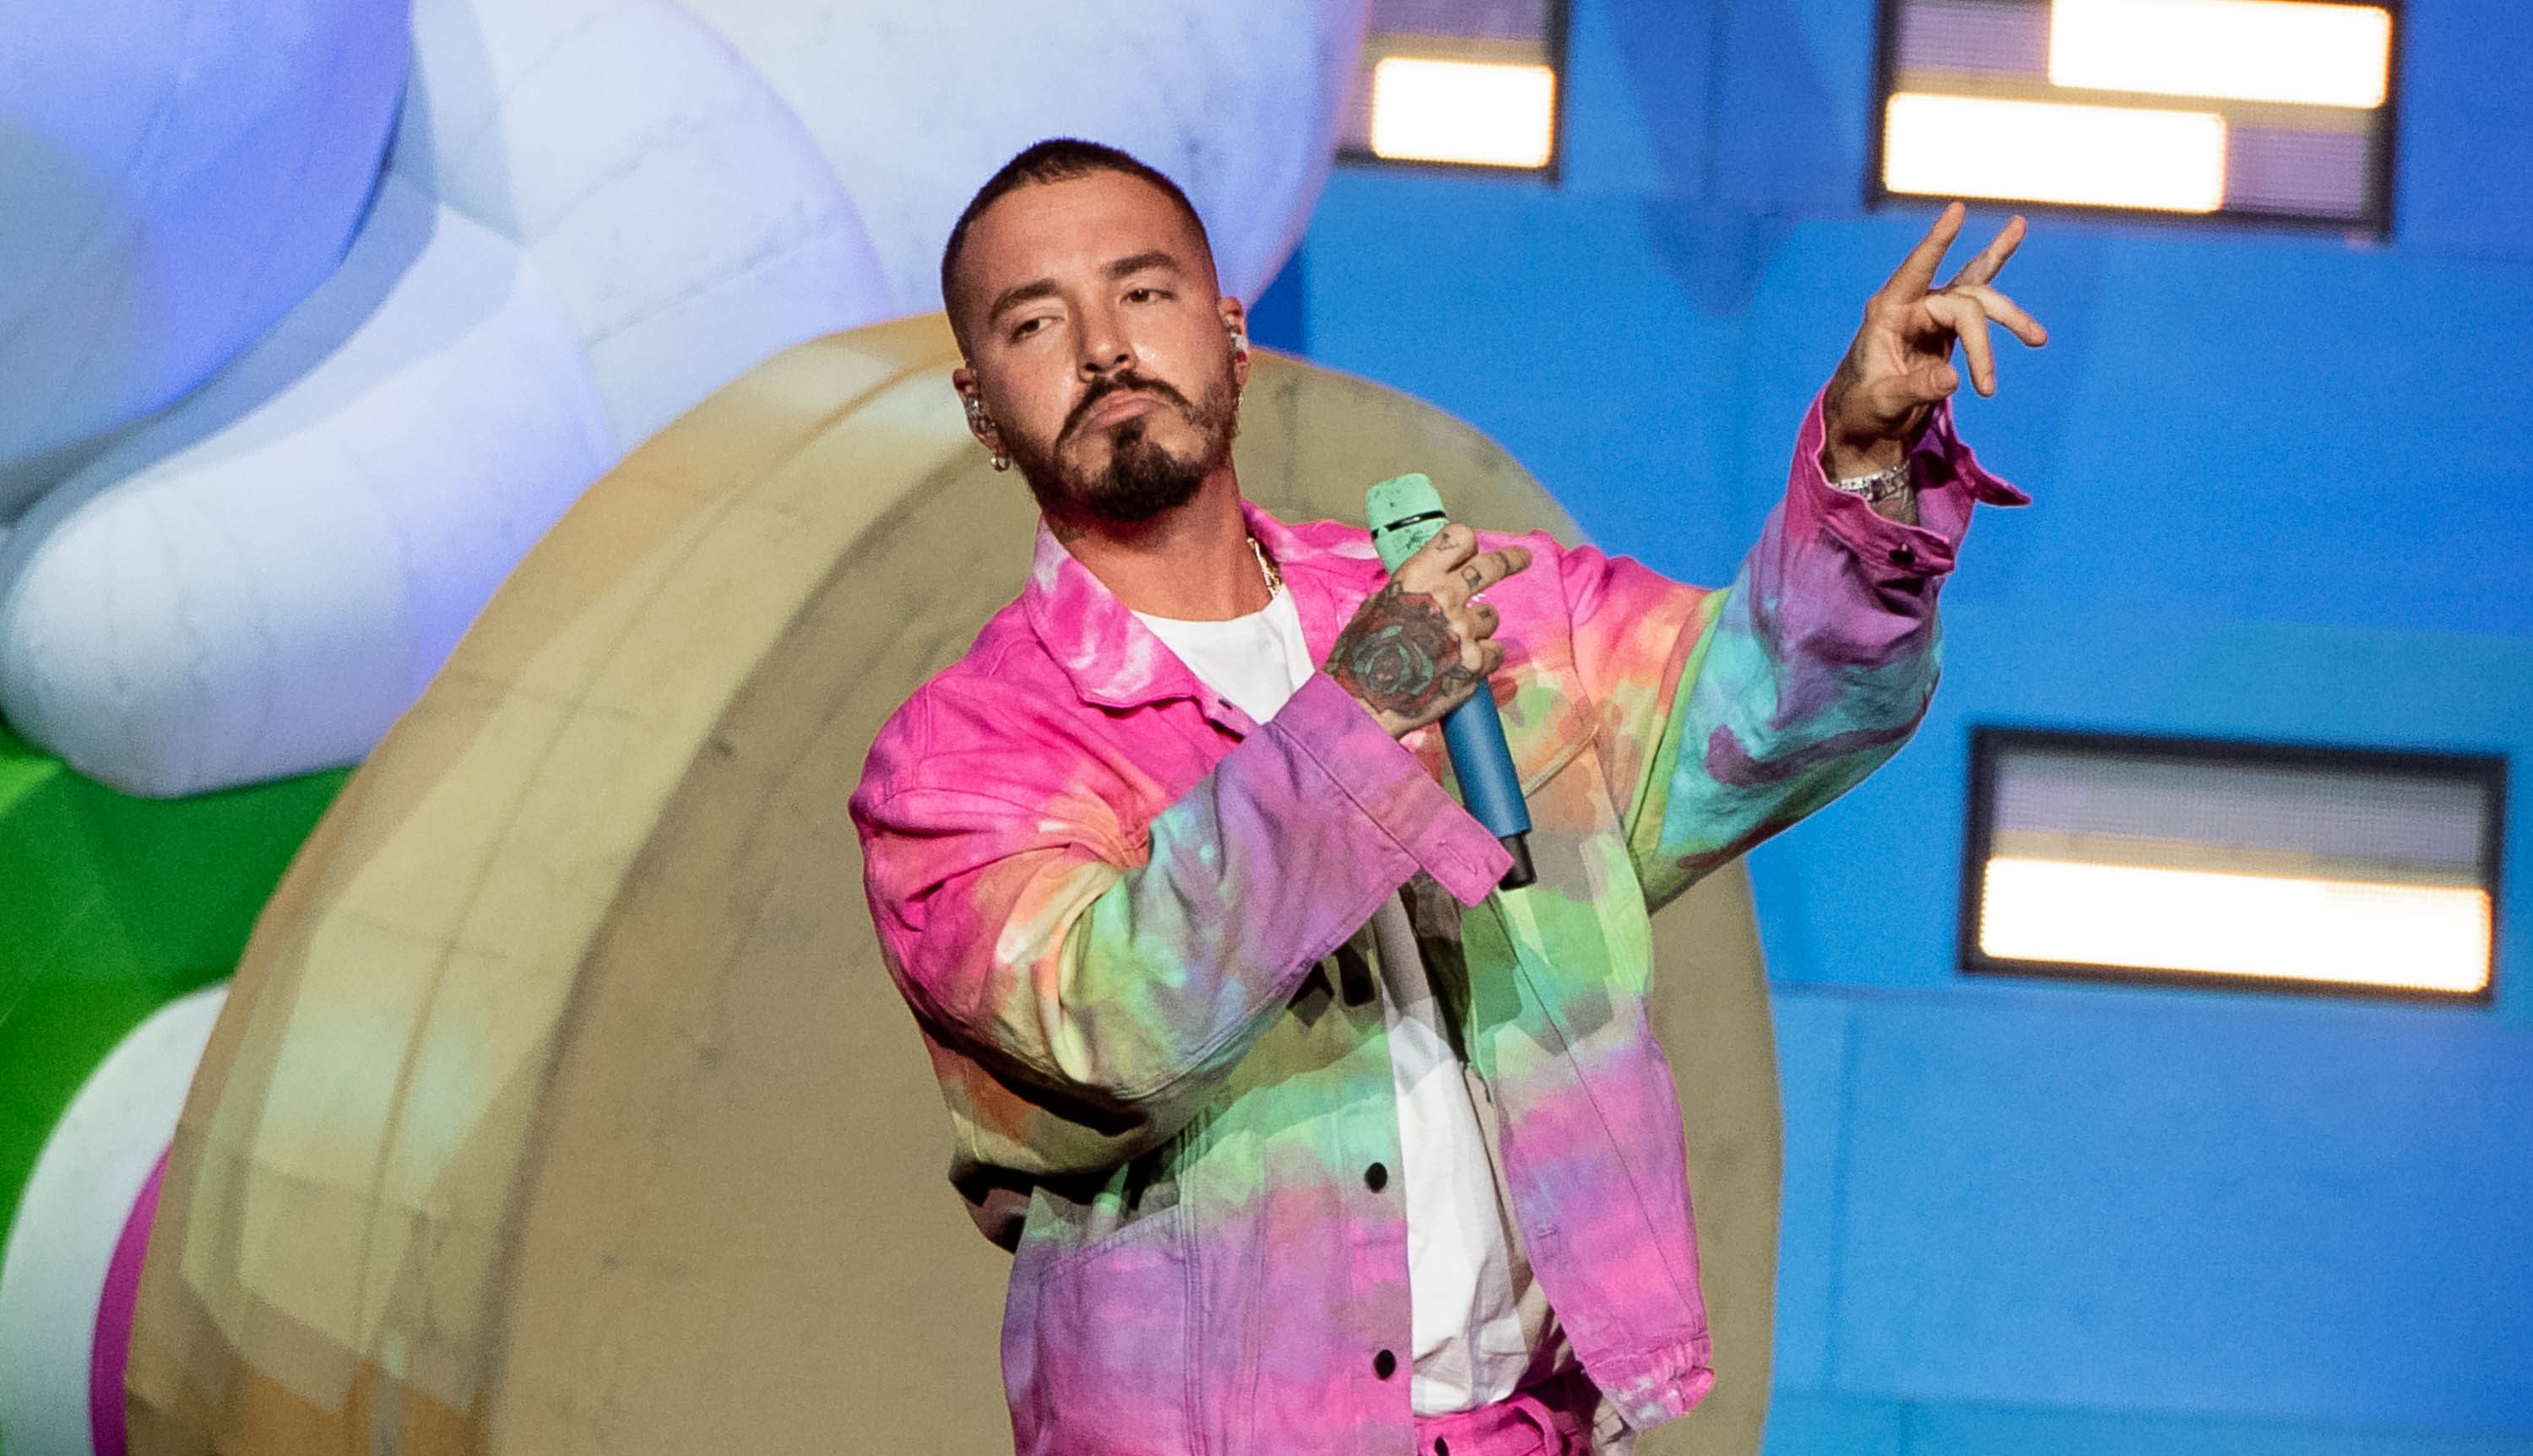 J Balvin Colores Capsule Collection with Takashi Murakami, Details